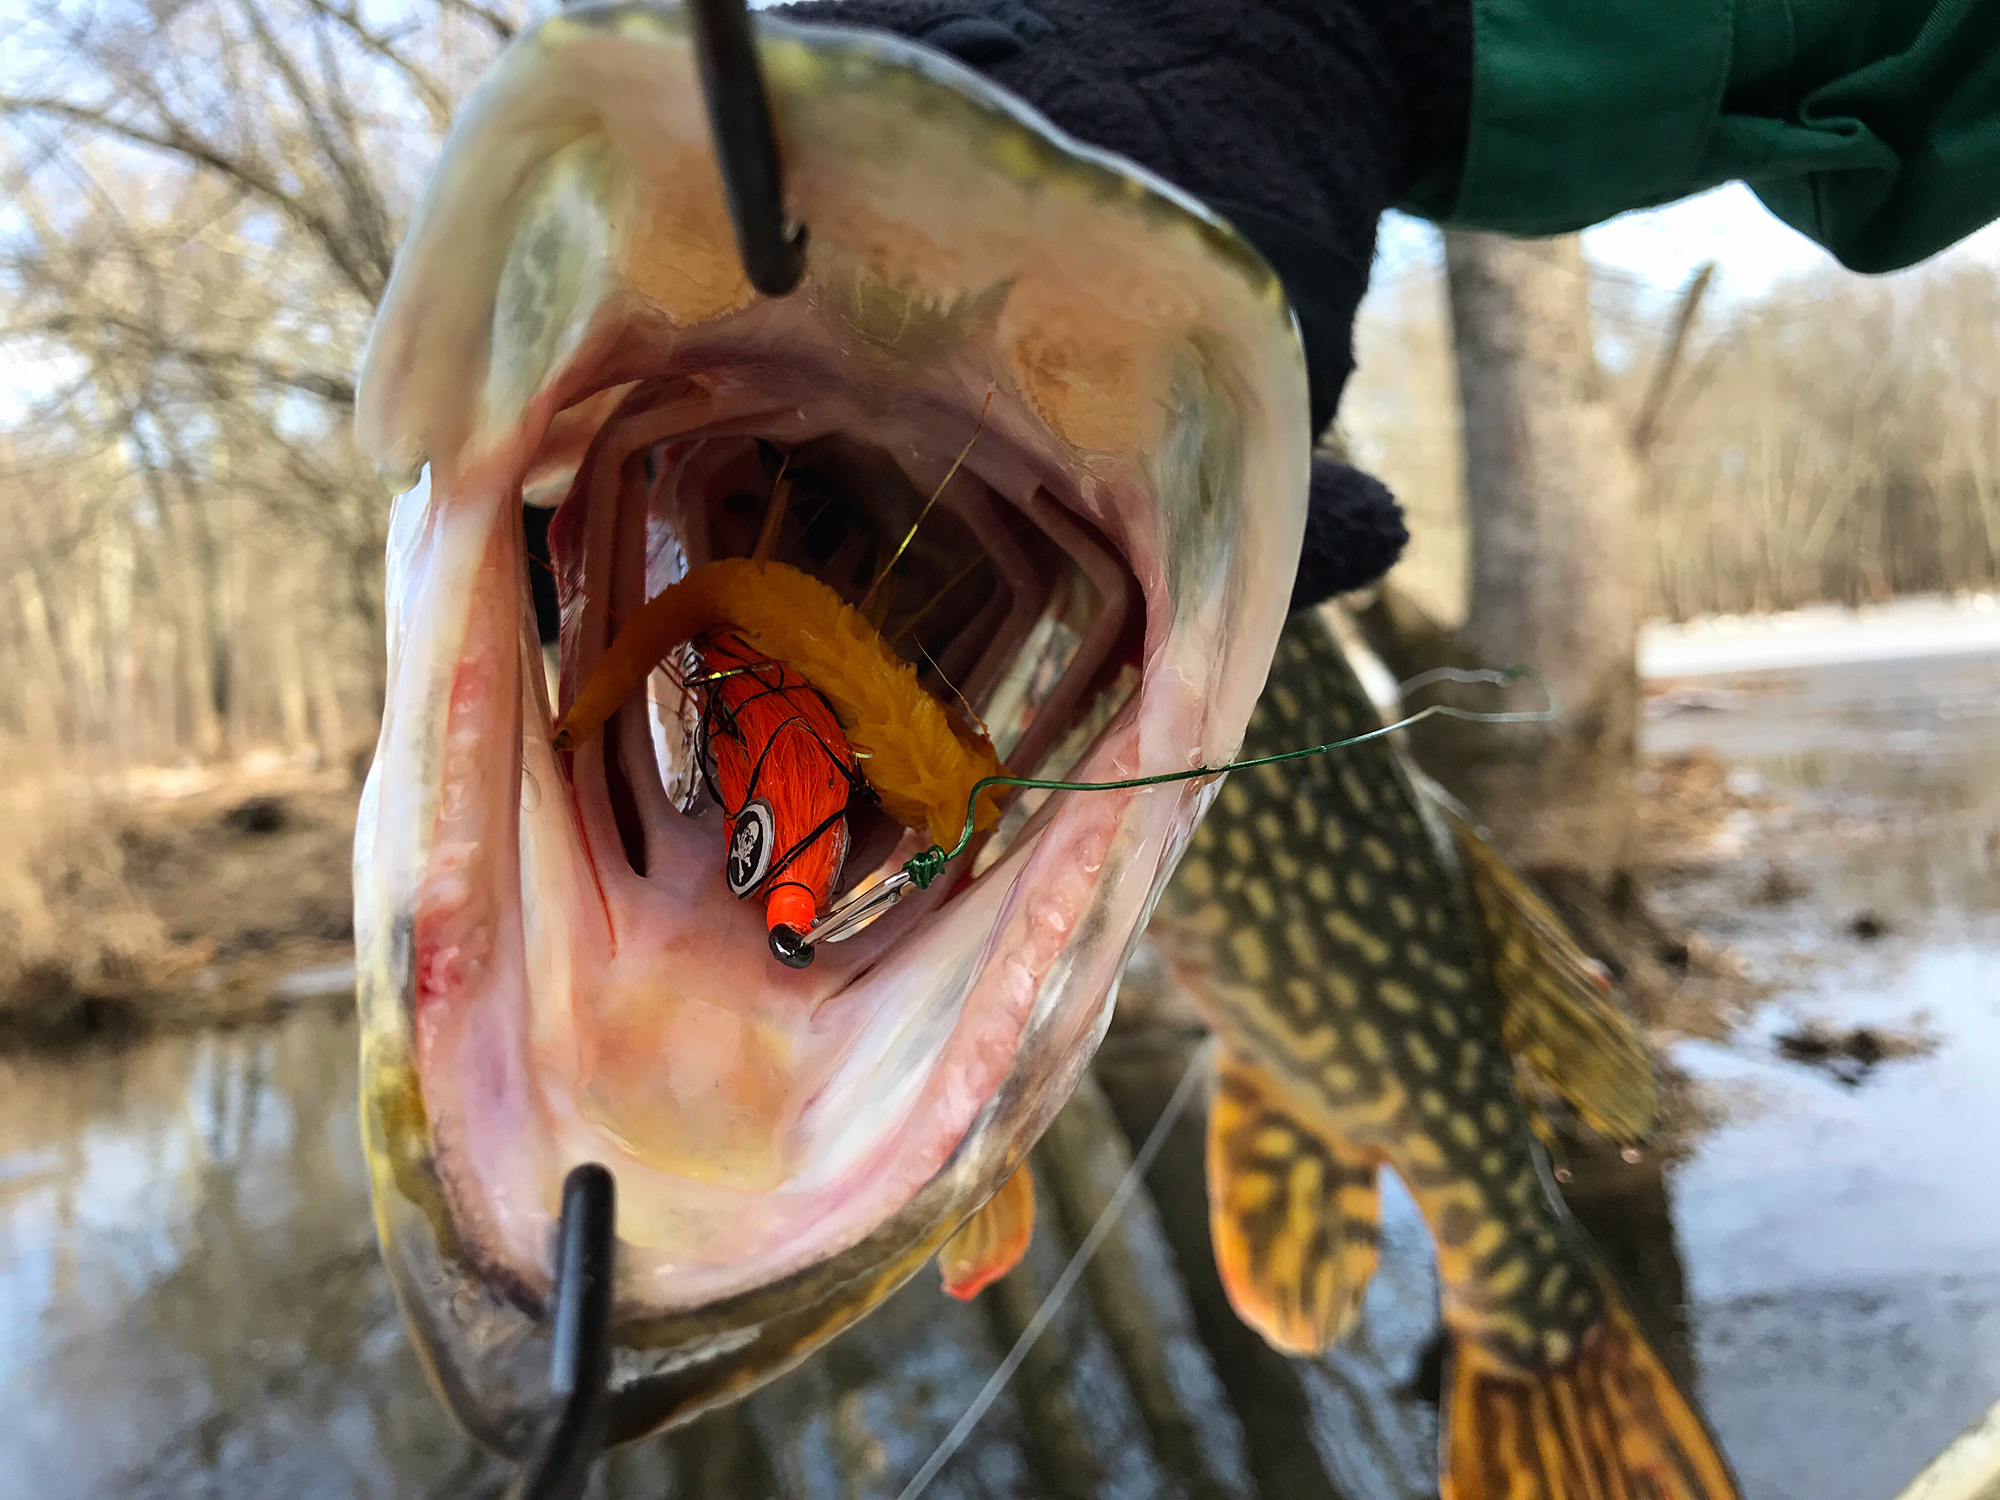 Fly Fishing with Pike Flies